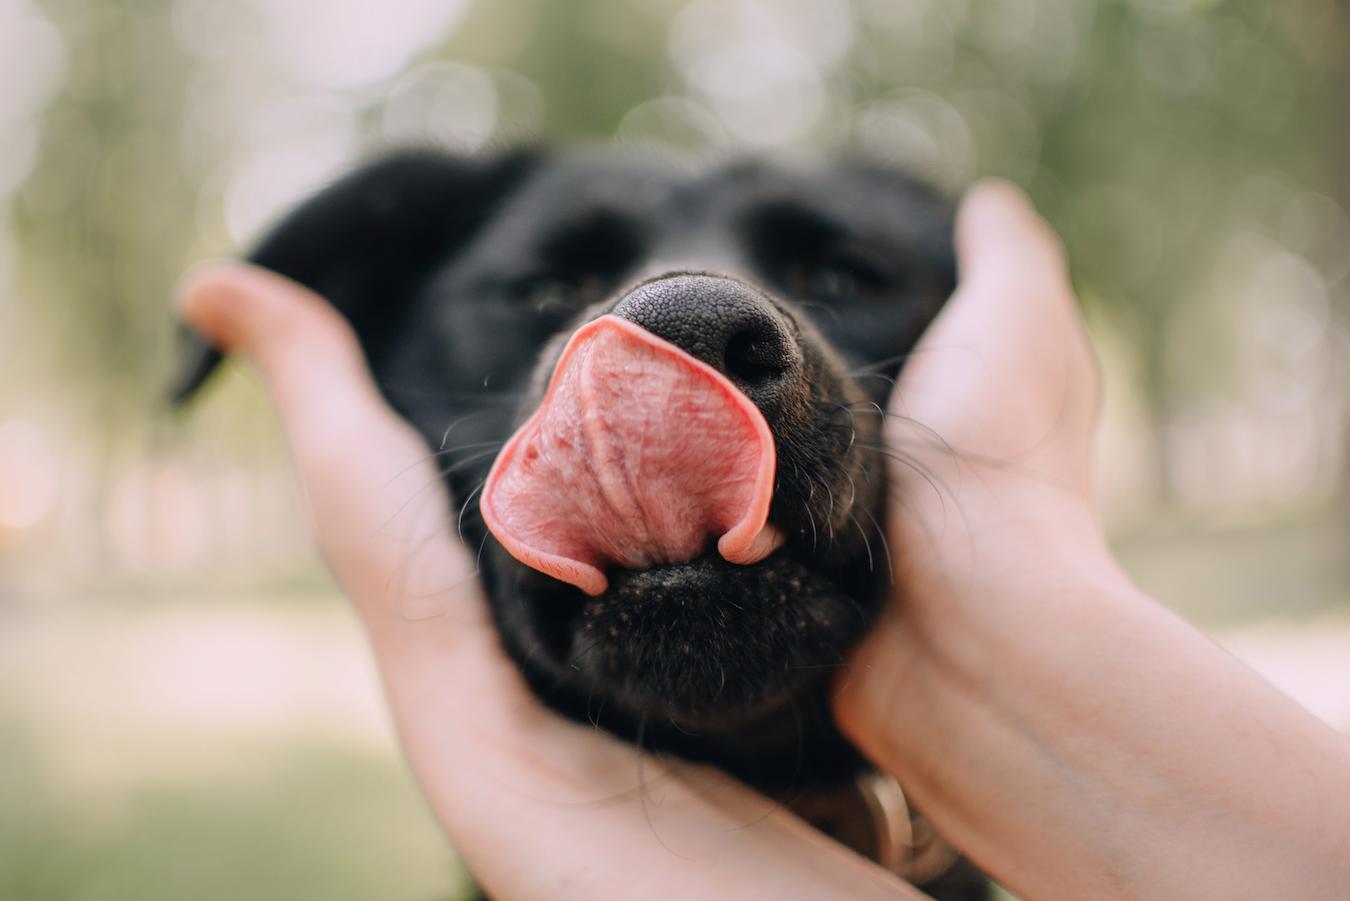 a dog's tongue one behavior many dogs licking dog's health dog's licking dog licks dogs licking dogs express dog's sense attention licking